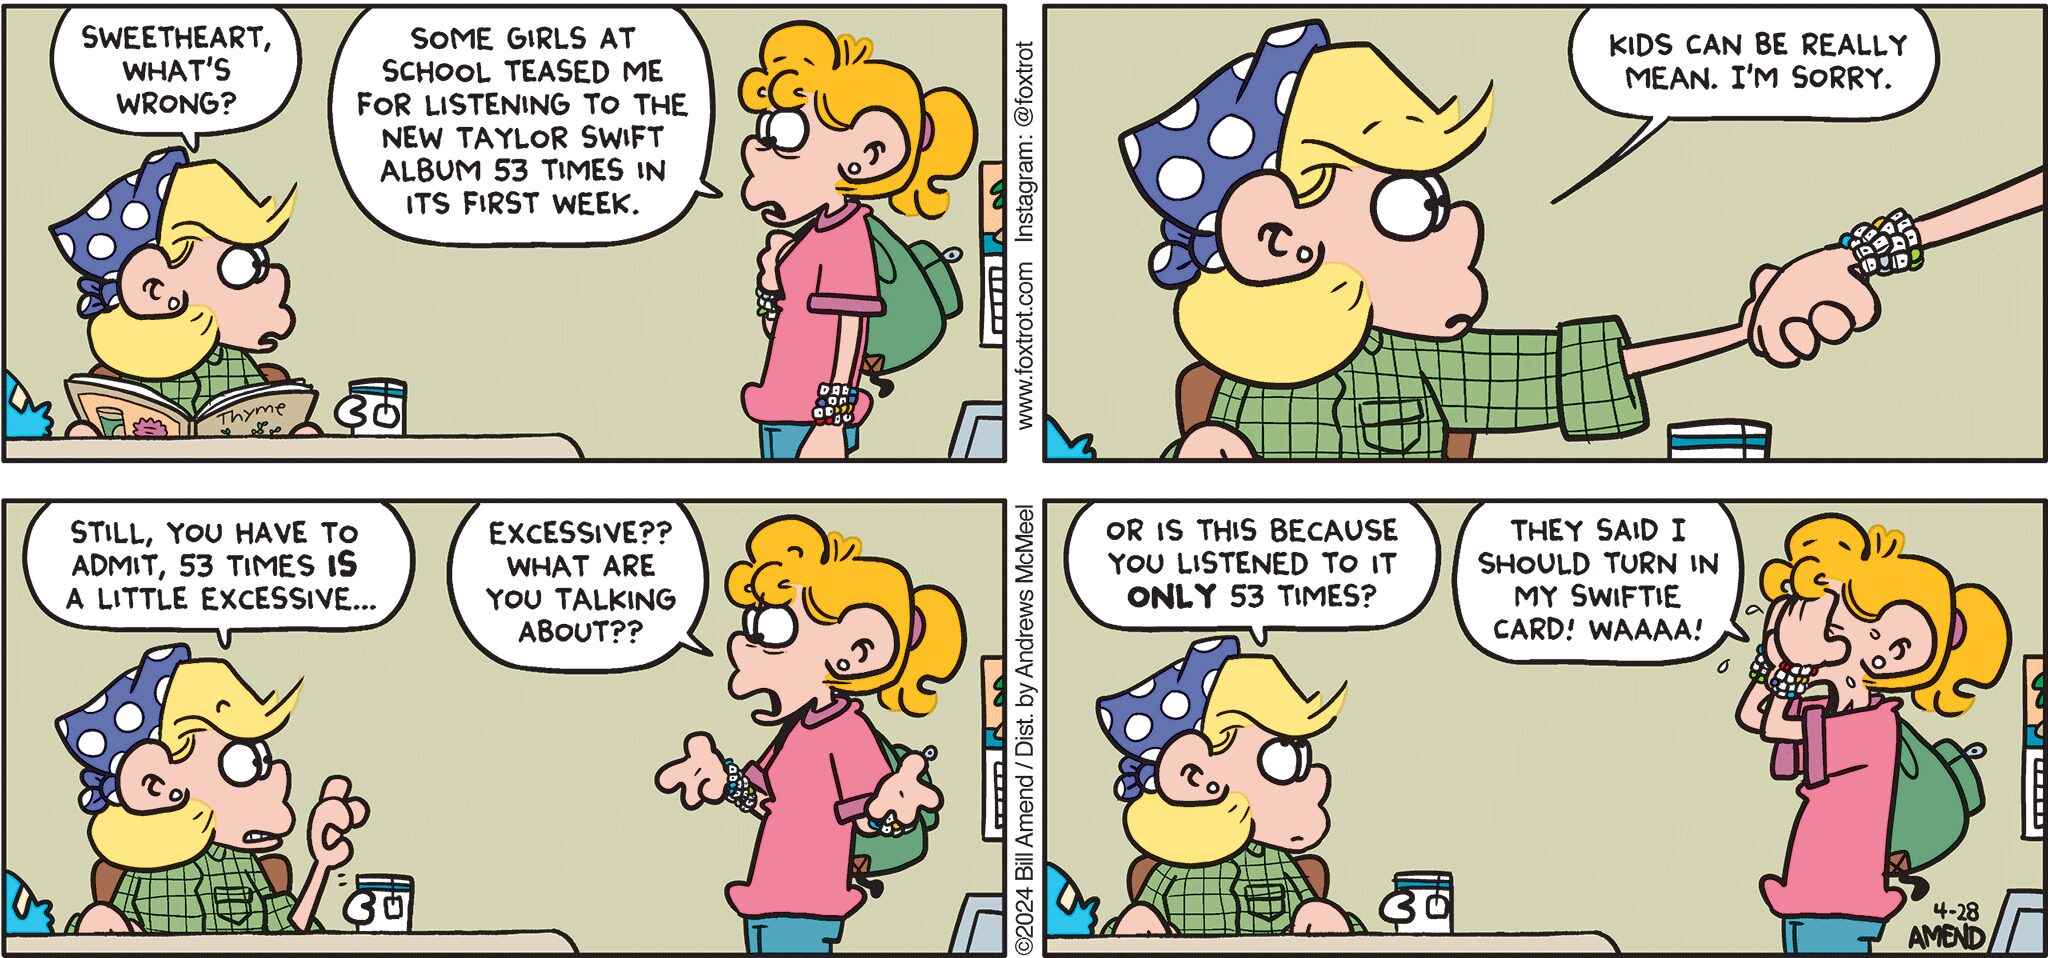 FoxTrot comic strip by Bill Amend - "Tayloring" published April 28, 2024 - Transcript: Andy Fox: Sweetheart, what's wrong? Paige Fox: Some girls at school teased me for listening to the new Taylor Swift album 53 times in its first week. Andy Fox: Kids can be really mean. I'm sorry. Still, you have to admit, 53 times is a little excessive... Paige Fox: EXCESSIVE?? What are you talking about?? Andy Fox: Or is this because you listened to it ONLY 53 times? Paige Fox: They said I should turn in my Swiftie Card! WAAAA!